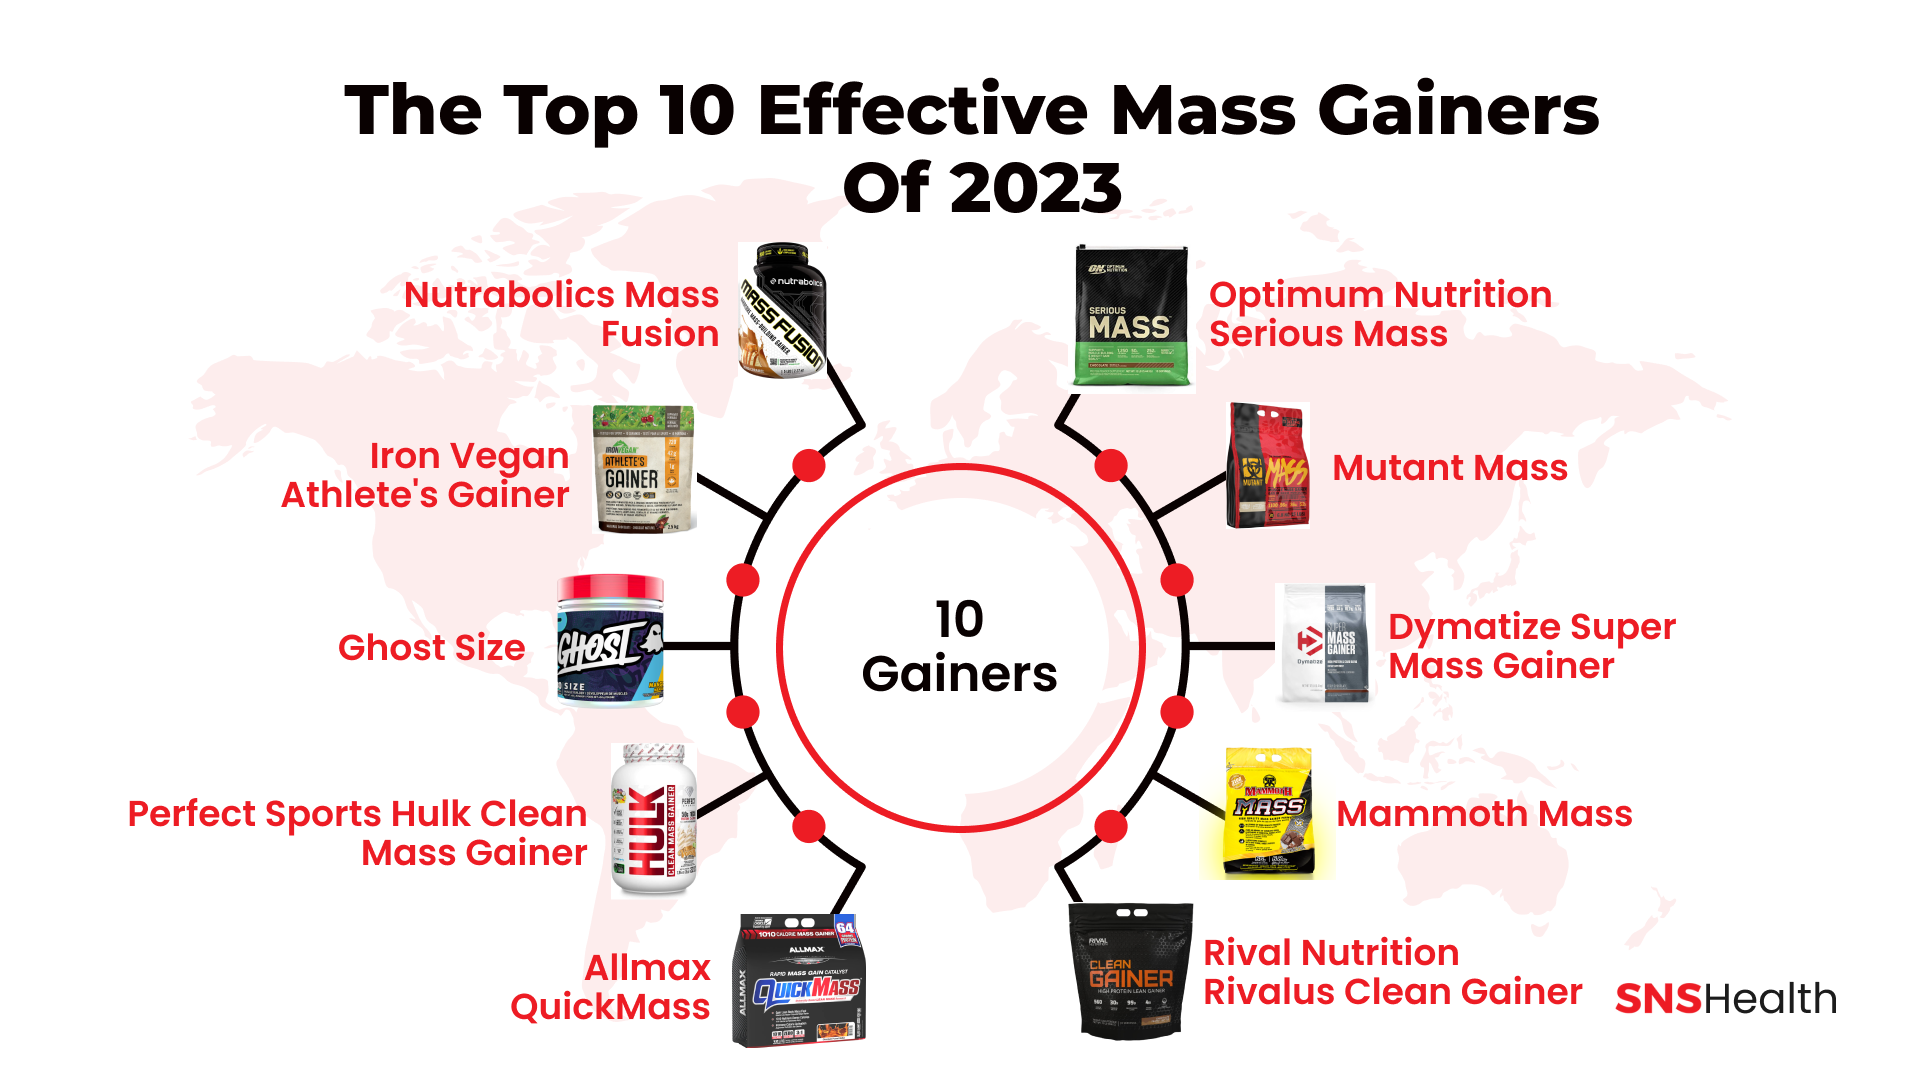 The Top 10 Effective Mass Gainers of 2023